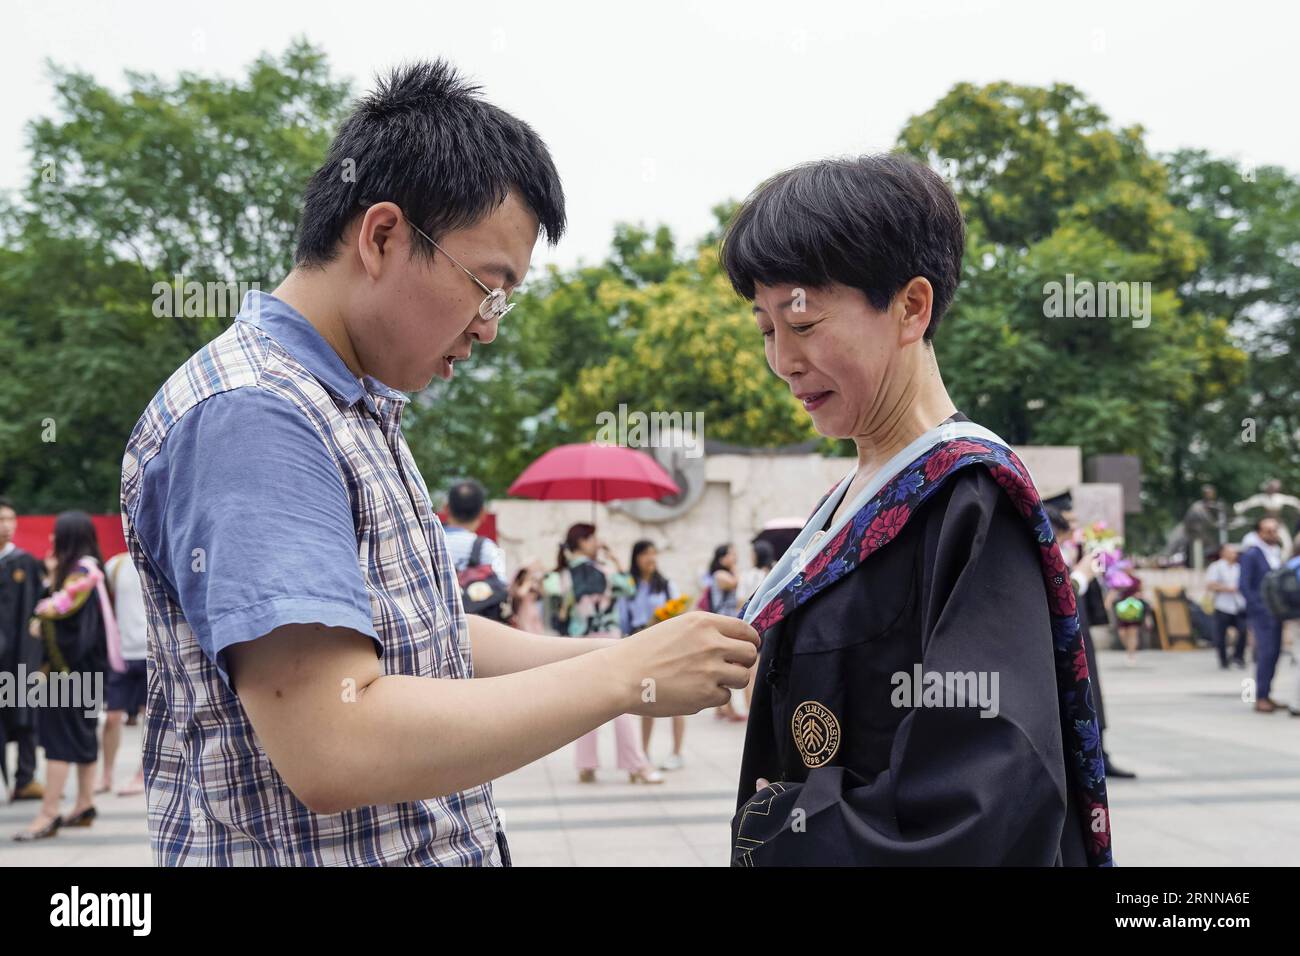 (170704) -- BEIJING, July 4, 2017 -- Gu Xiaoyi, an undergraduate of Peking University, helps his mother wear his baccalaureate gown, after the commencement and the degree ceremony of the 2017 undergraduates of the Peking University in Beijing, capital of China, July 4, 2017. ) (lb) CHINA-BEIJING-PKU-GRADUATION CEREMONY (CN) ShenxBohan PUBLICATIONxNOTxINxCHN   Beijing July 4 2017 GU Xiaoyi to UNDERGRADUATE of Beijing University Helps His Mother Wear His Baccalaureate Gown After The commencement and The Degree Ceremony of The 2017 undergraduates of The Beijing University in Beijing Capital of Ch Stock Photo